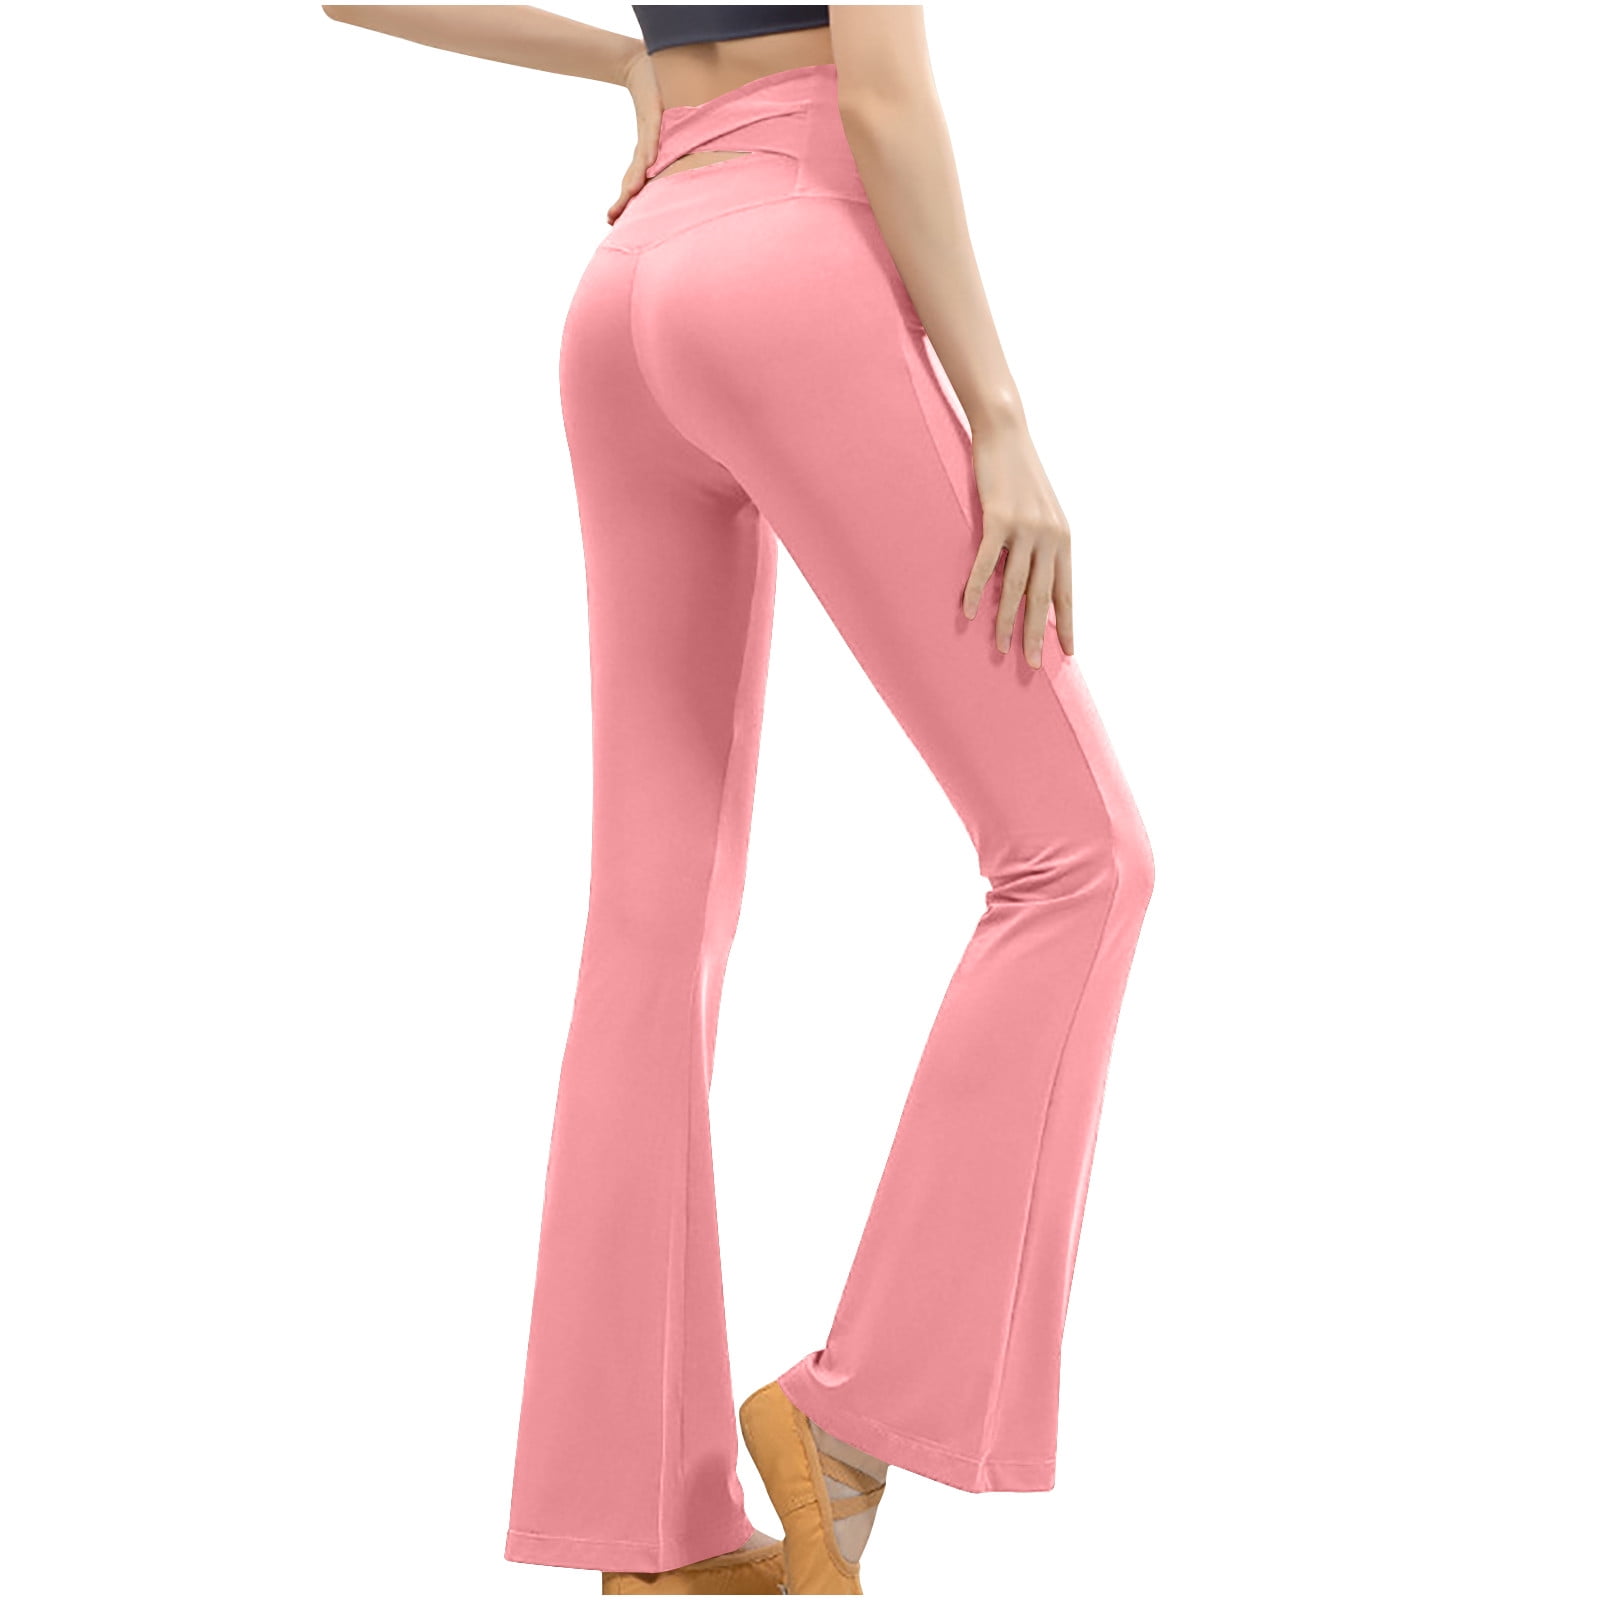 Keolorn Bootcut Yoga Pants for Women High Waist Workout Pants - Import It  All